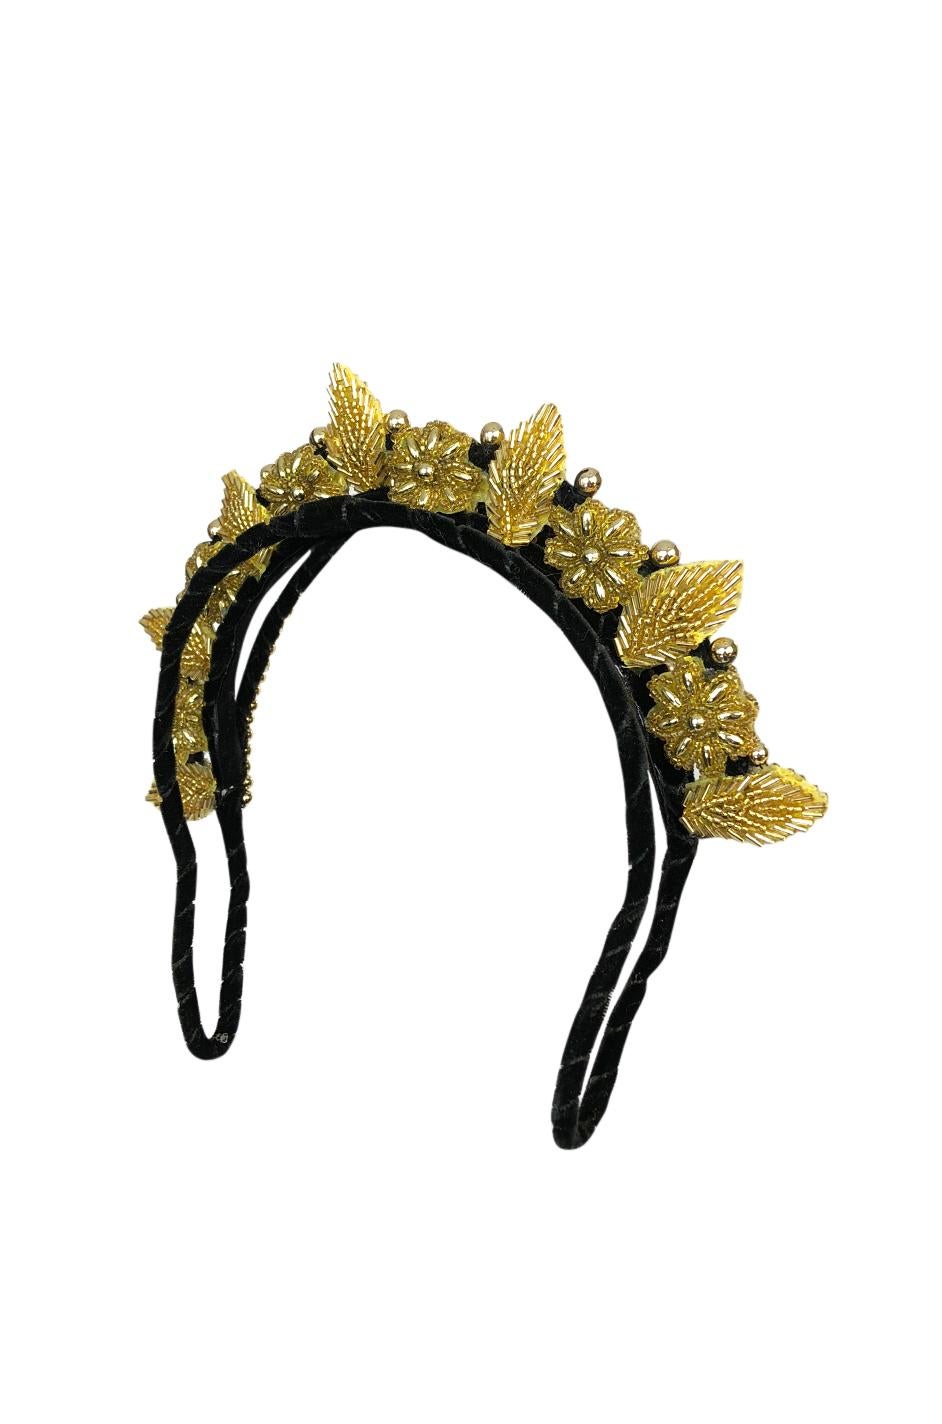 This is the second collection of headpieces, designed and made by hand by the talented Lucia Echavarría of the Magnetic Midnight label. Both this collection and the first that we did together draws its inspiration from some of the most famous